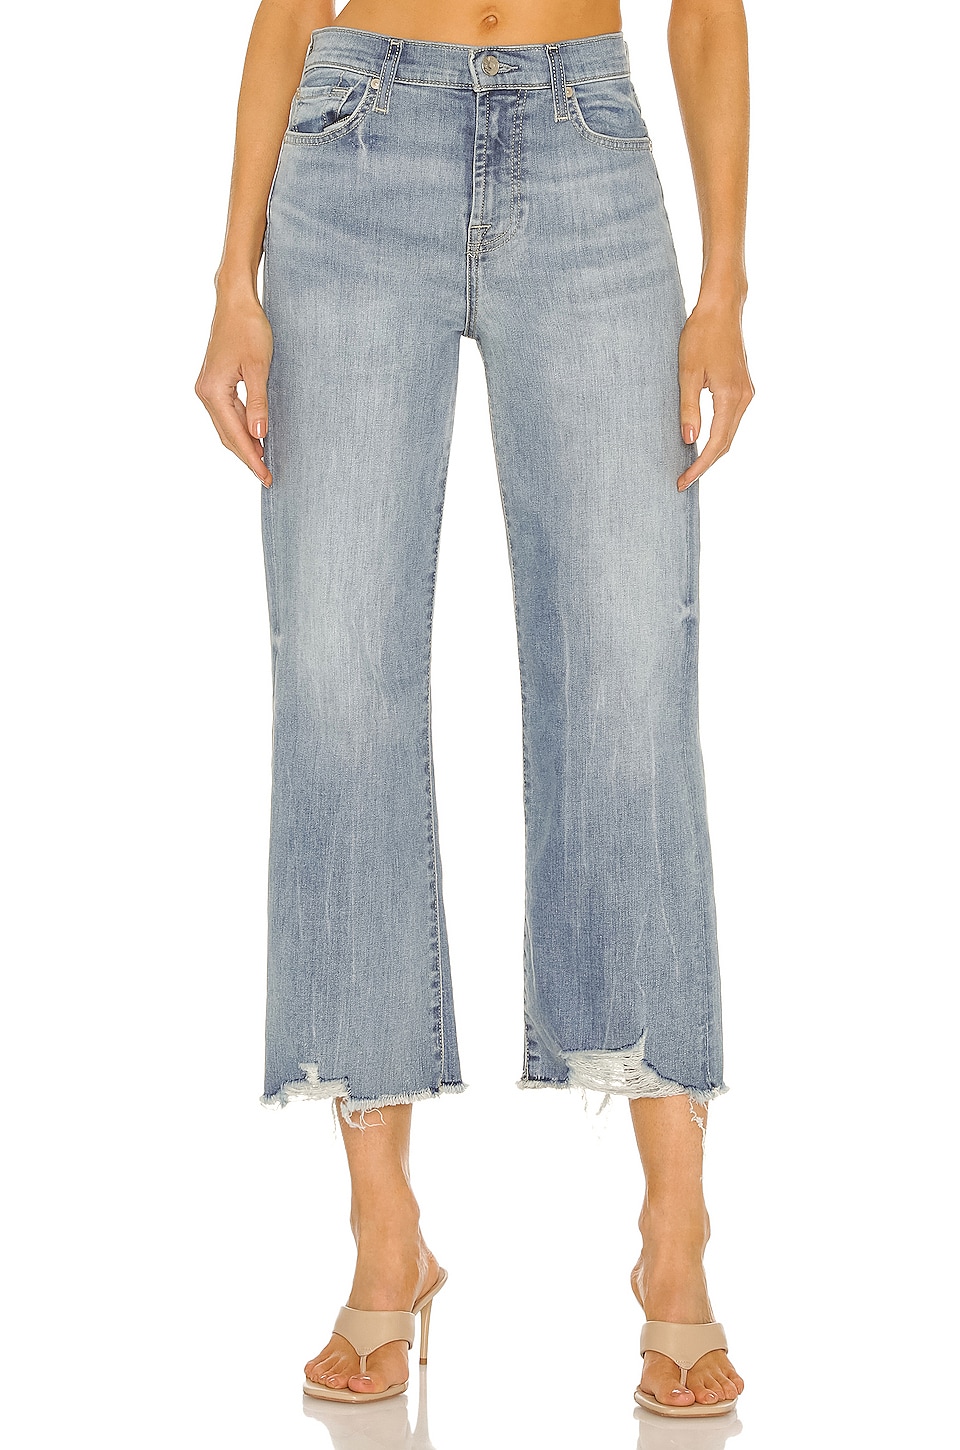 7 For All Mankind Cropped Alexa Jean in Love Child | REVOLVE